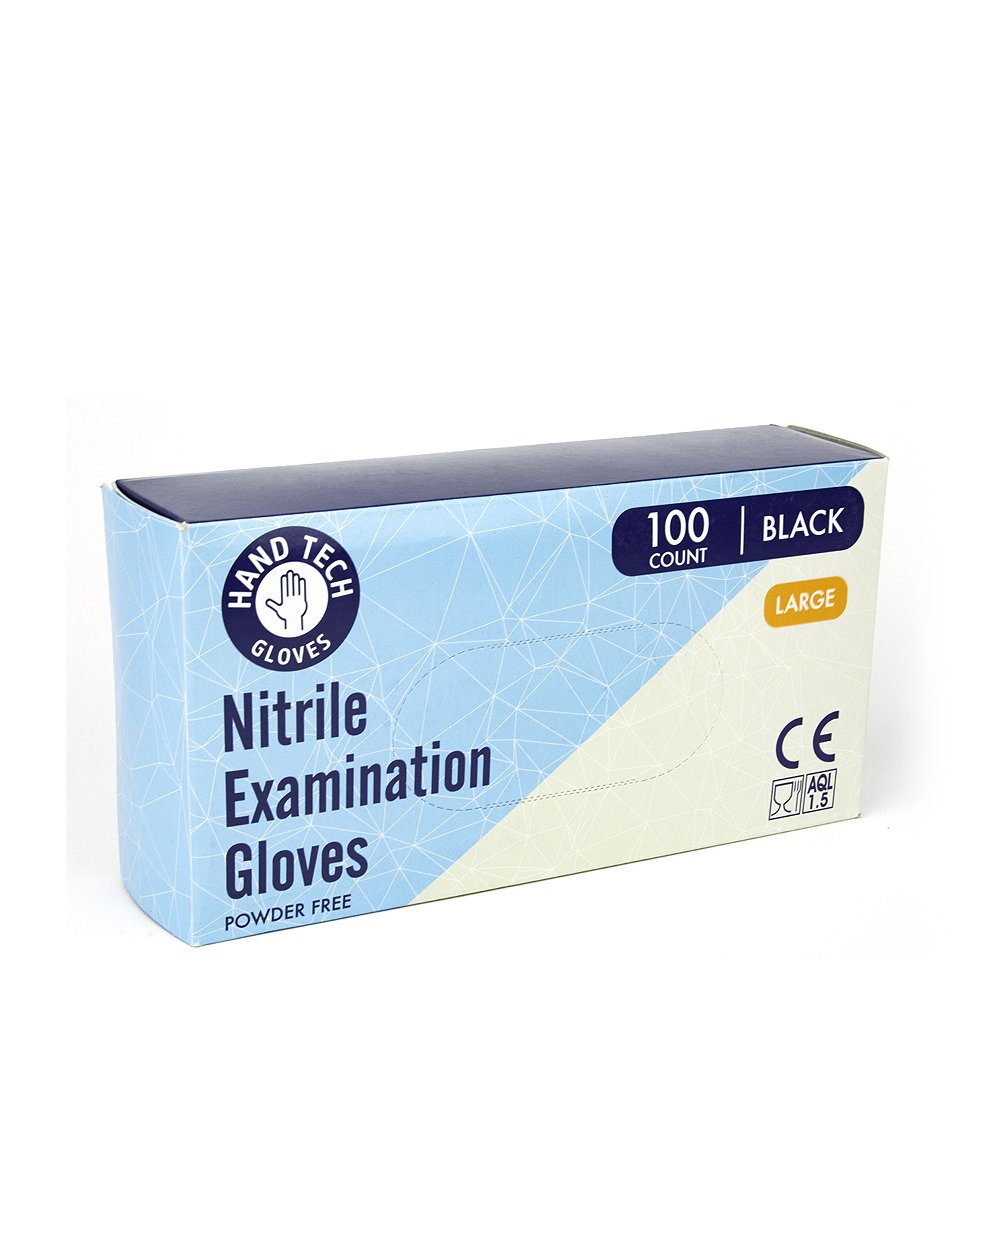 HAND TECH | Powder-Free Disposable Gloves | Black - Nitrile - 100 Count - 6